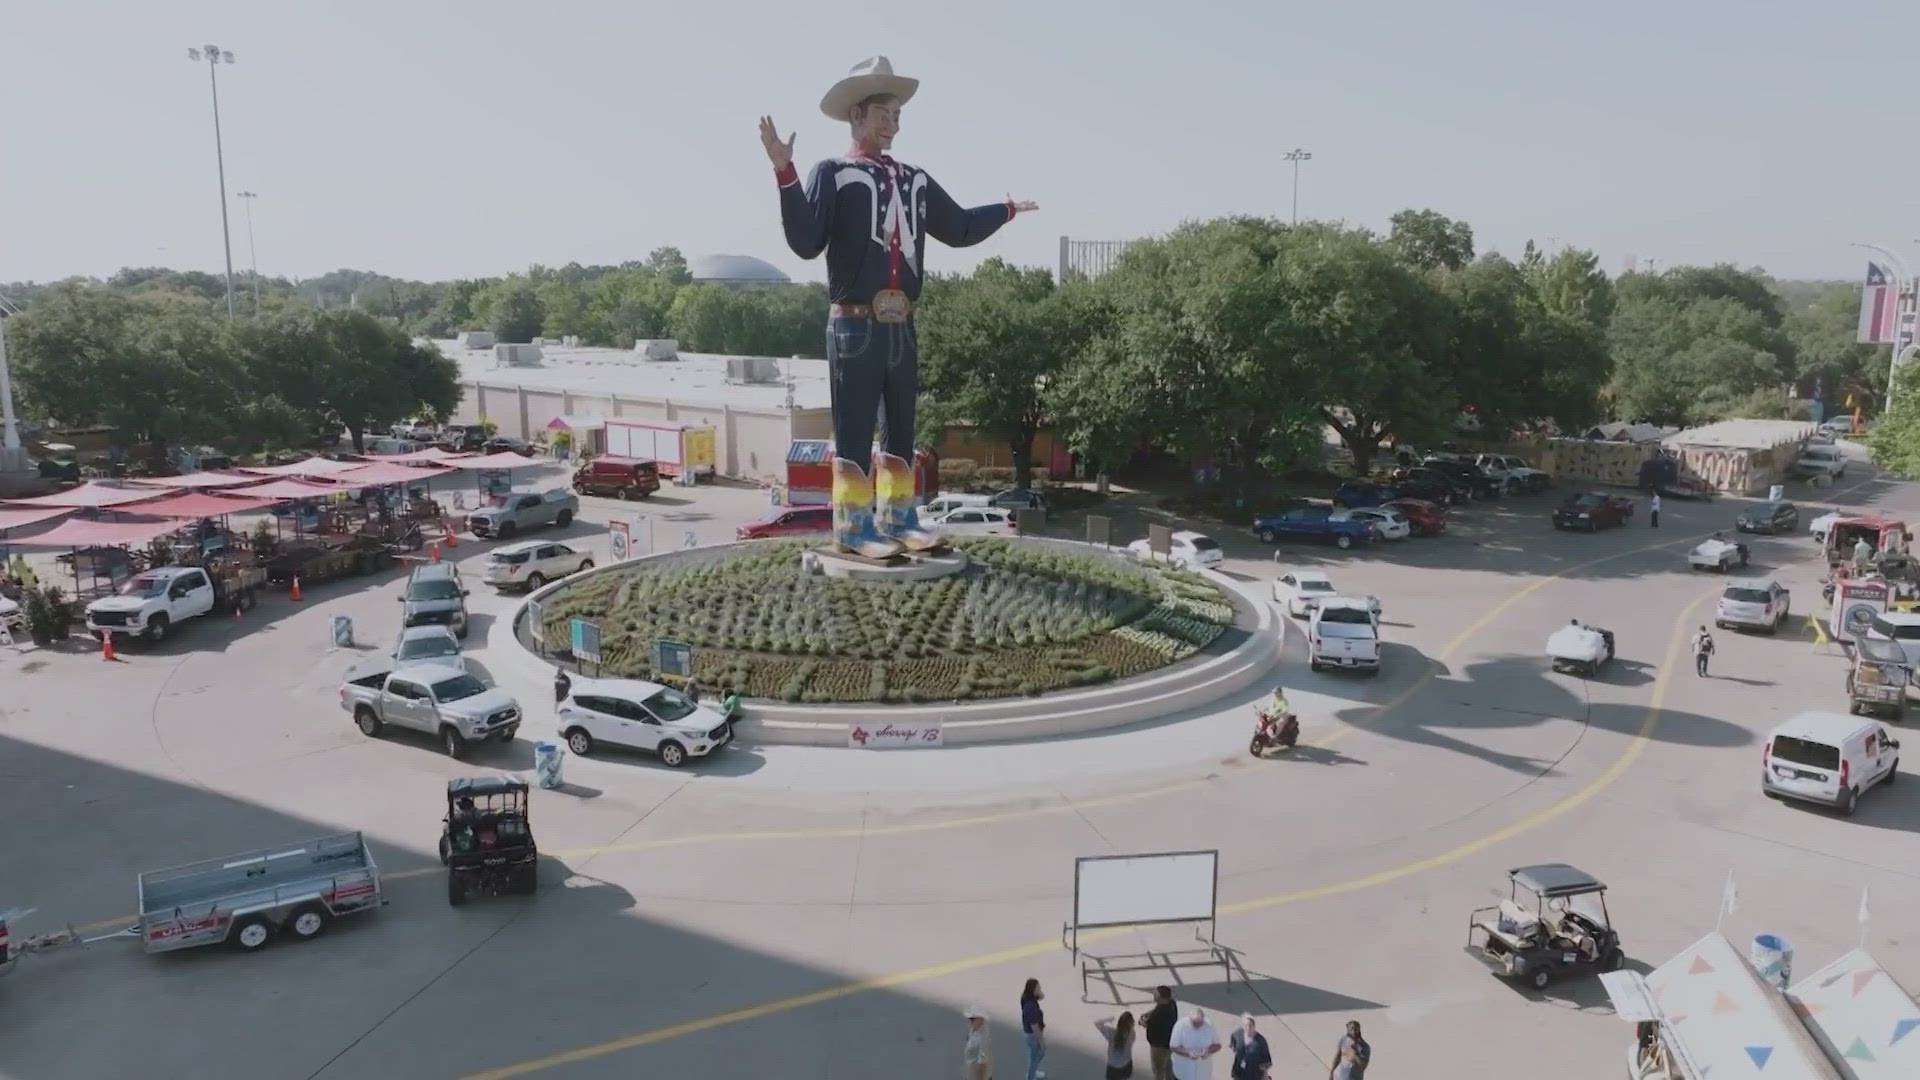 The world's tallest cowboy is getting ready to greet thousands as Texans from all over the state are making plans for a trip to fair park